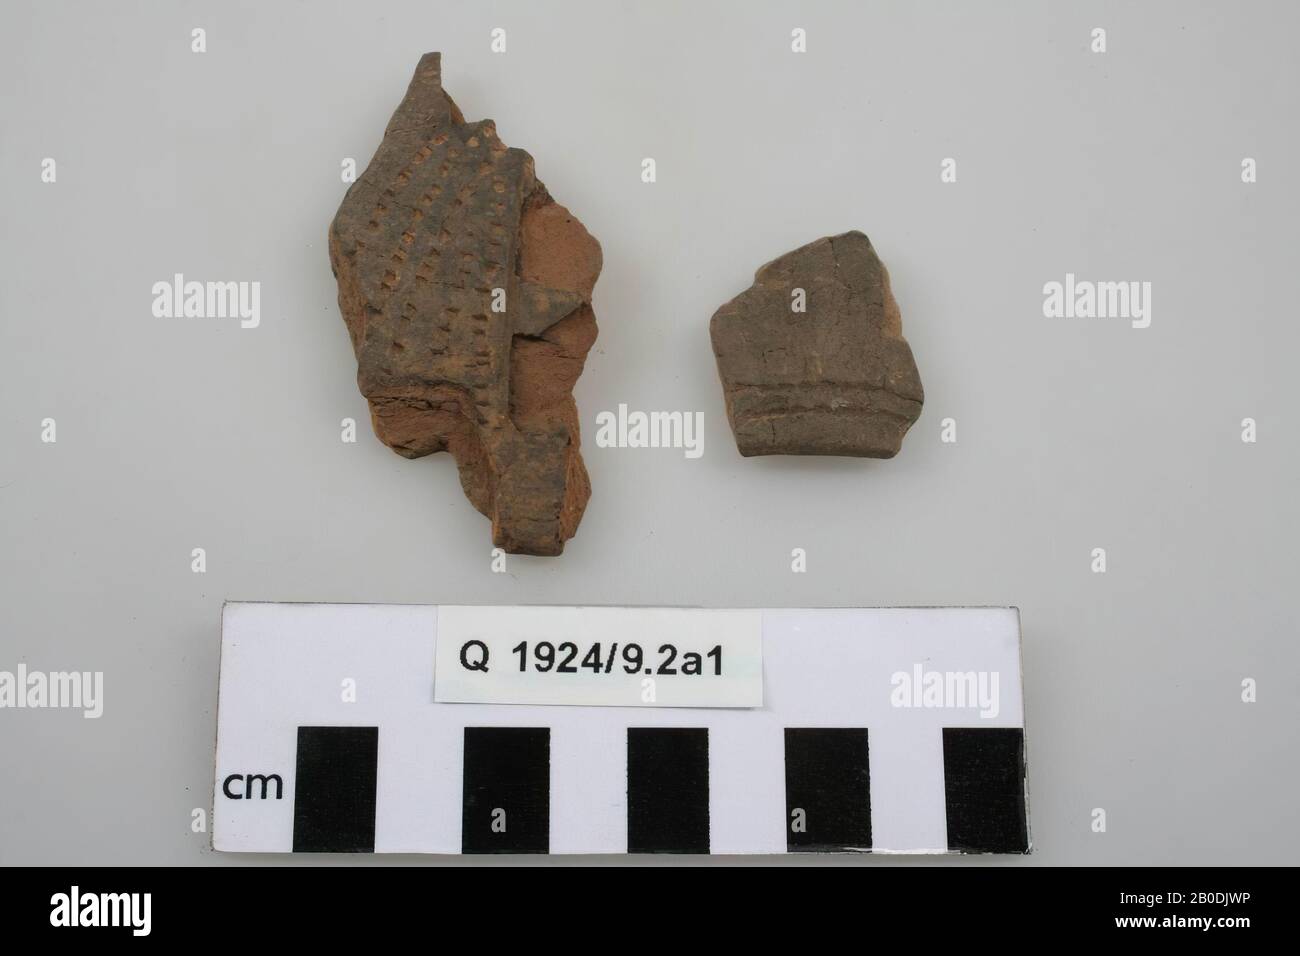 2 shards, of which one part is missing in relation to the inventory card, shards, earthenware, 7 x 4,1 cm (largest shard), prehistory, Belgium, unknown, unknown, Tilice Stock Photo